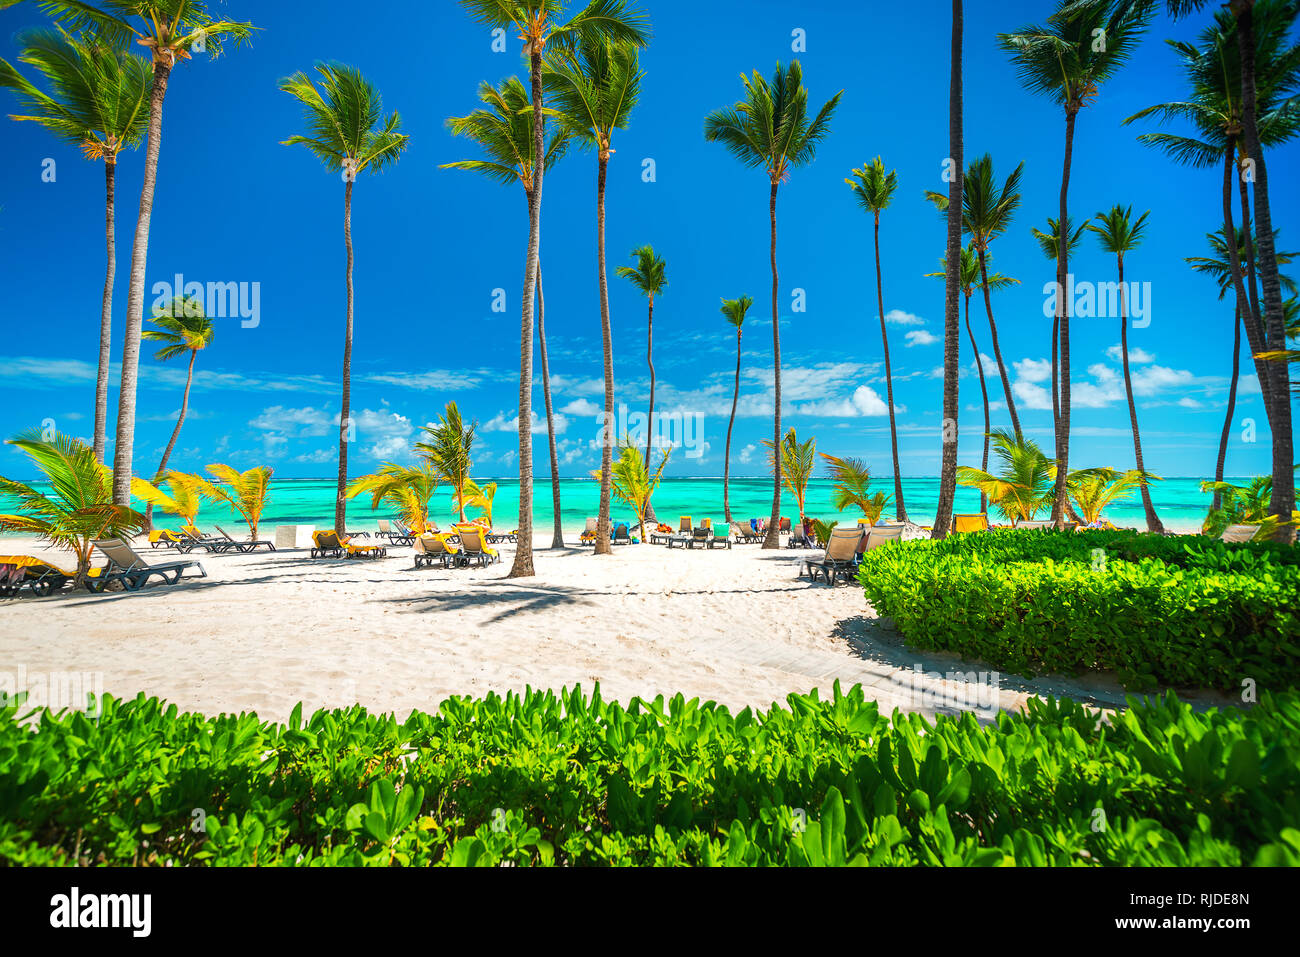 Palm trees on the tropical beach, Dominican Republic Stock Photo